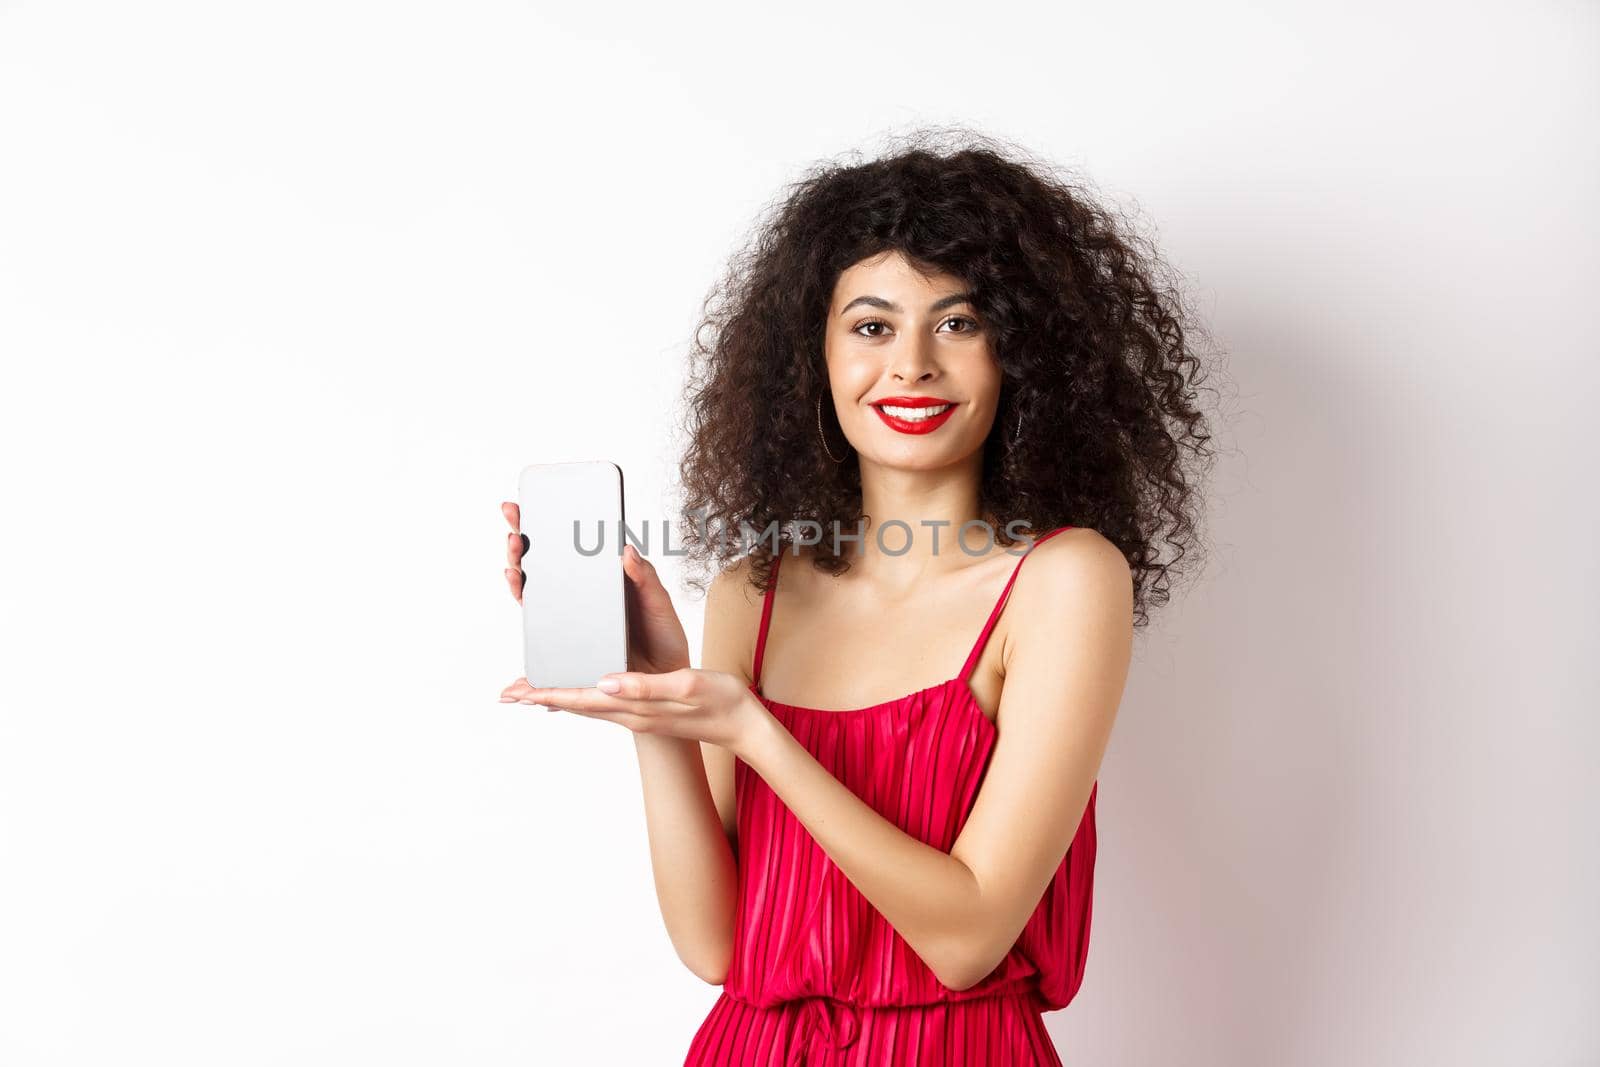 Elegant woman in red dress and makeup, showing blank smartphone screen and smiling, standing over white background. Copy space